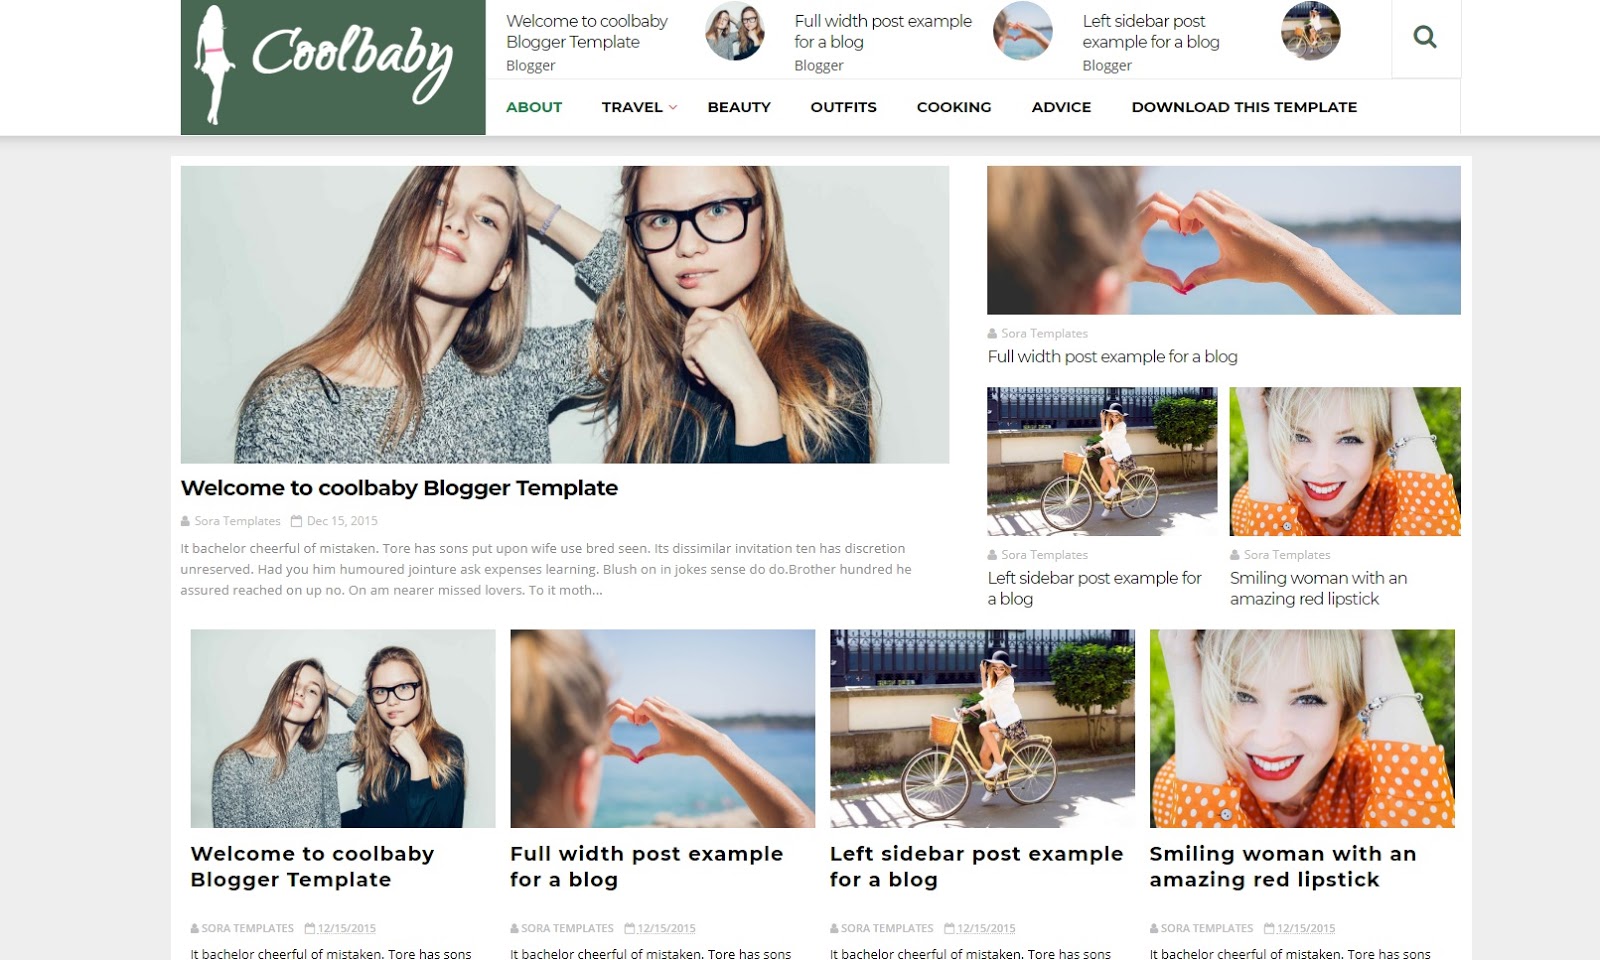 CoolBaby Blogger Template